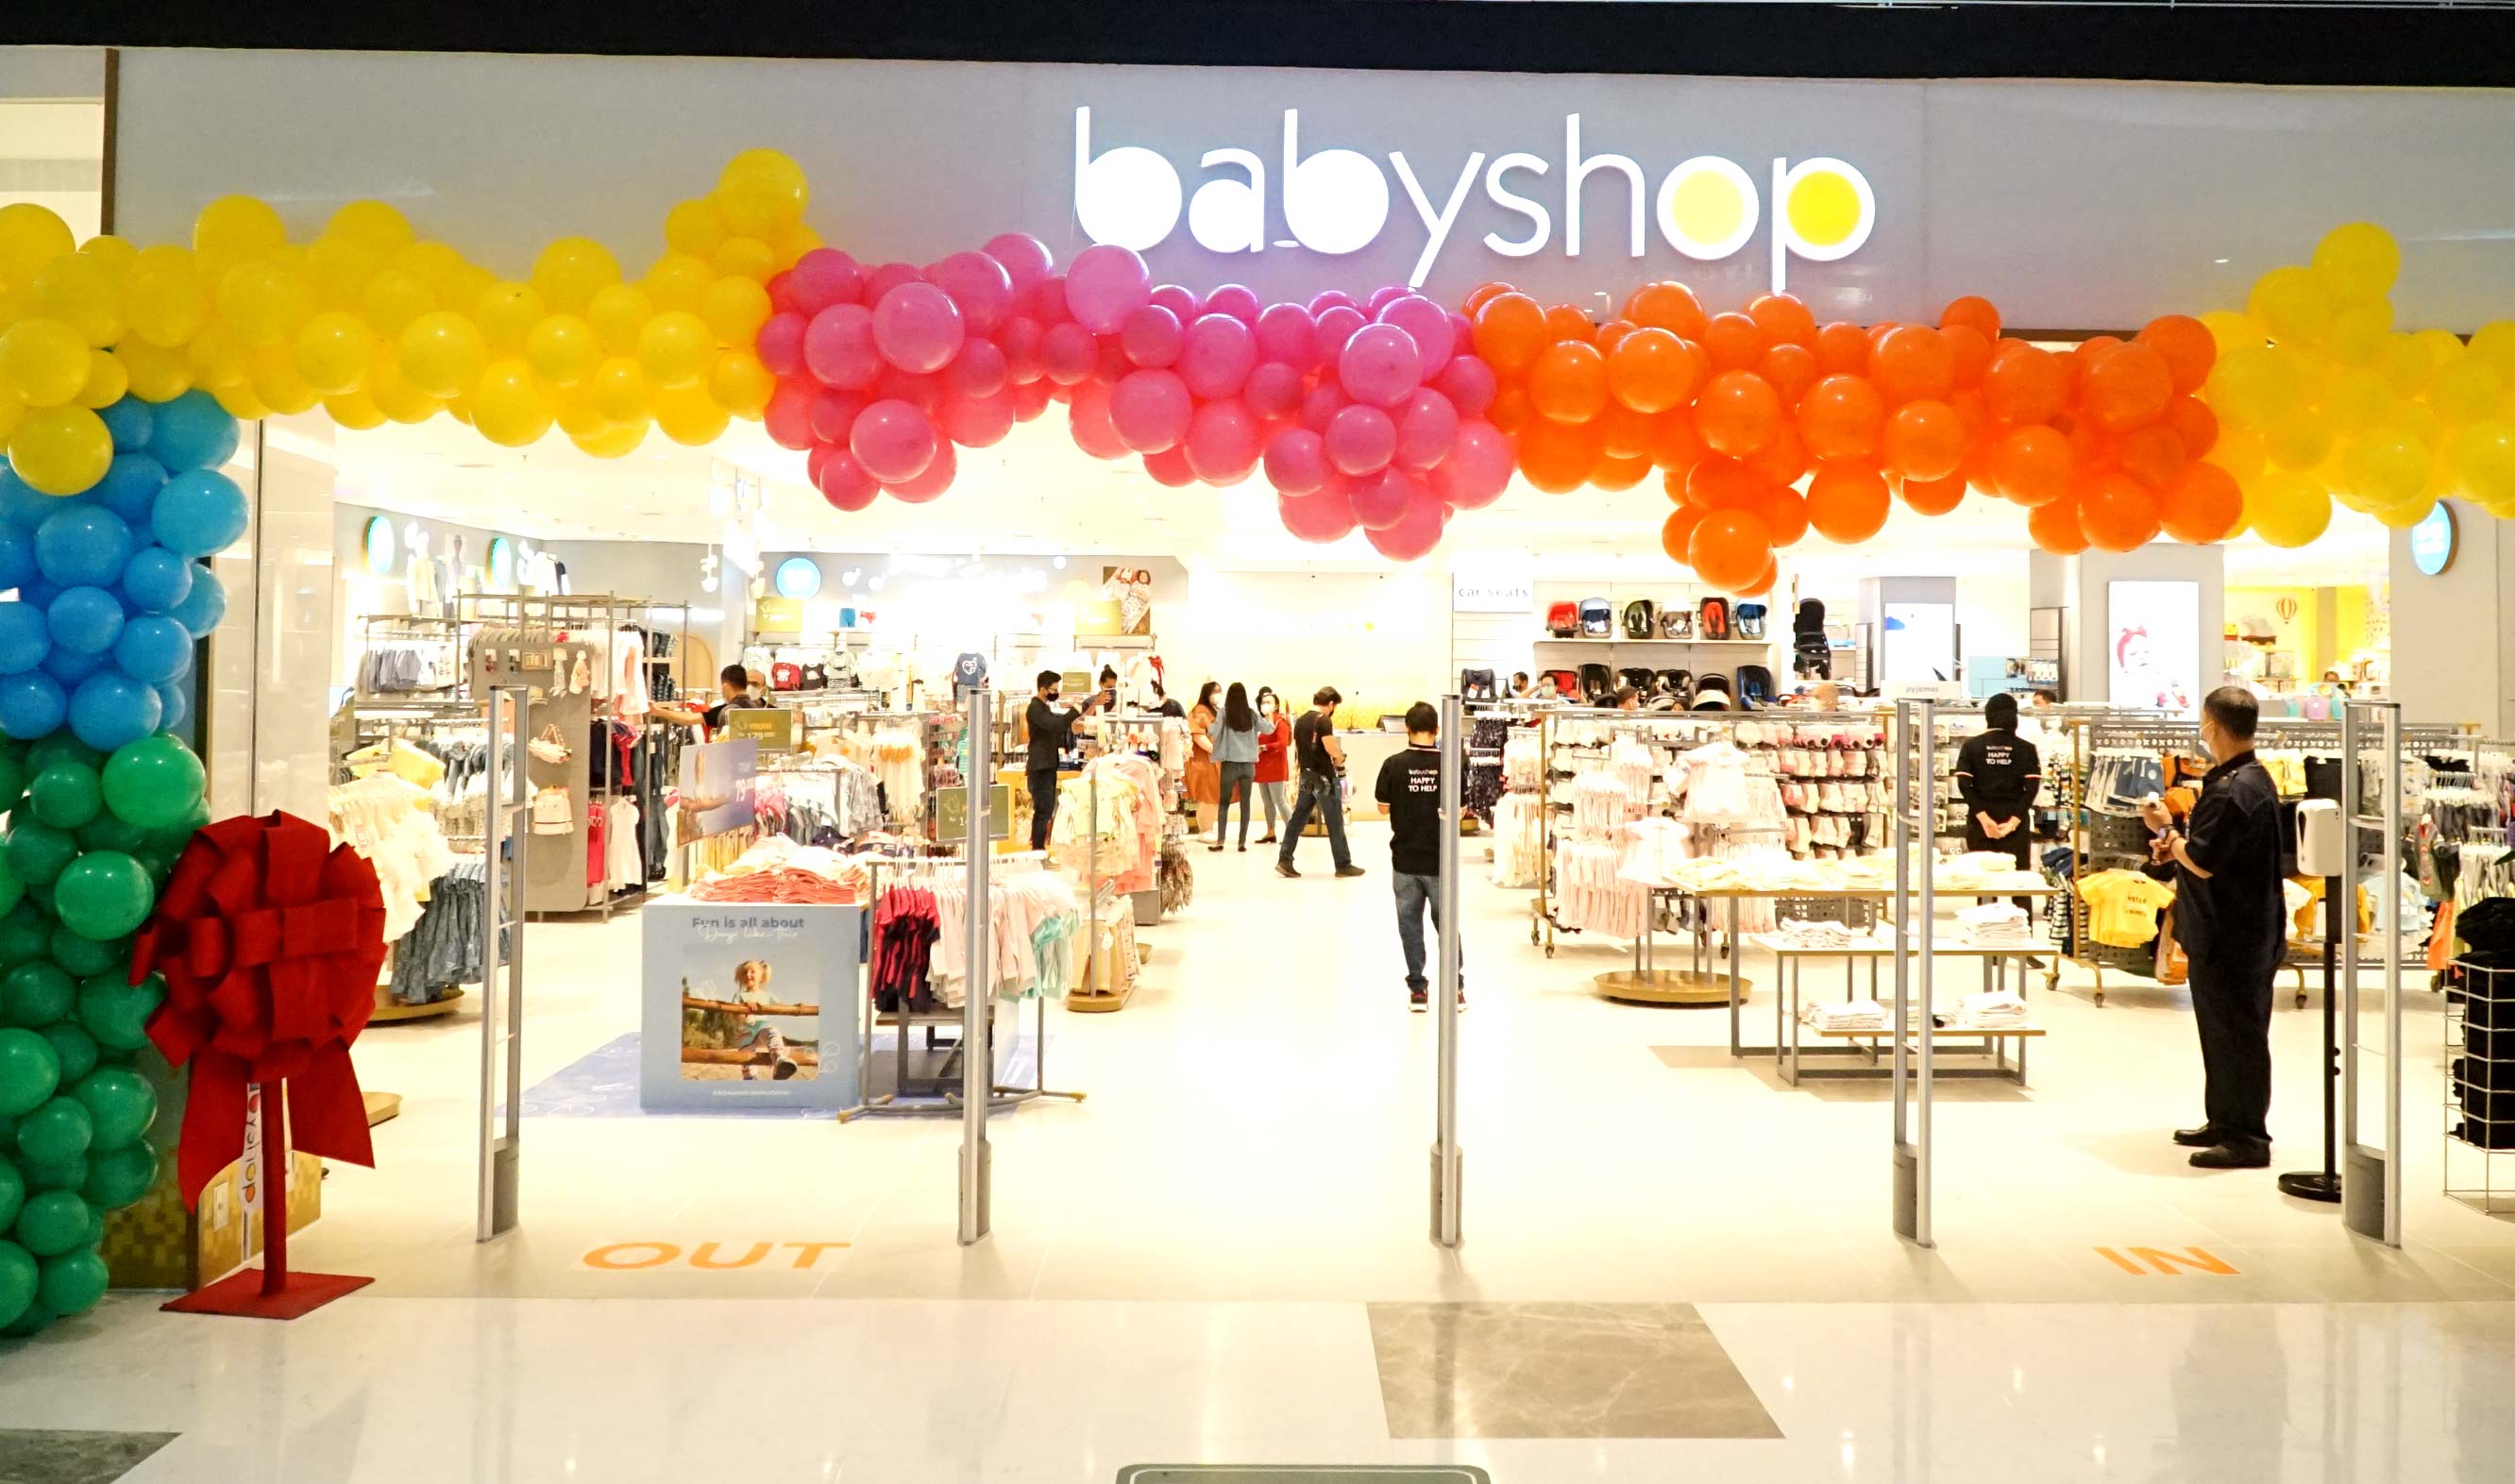 Baby Shop shop front in lippo mall puri st. moritz